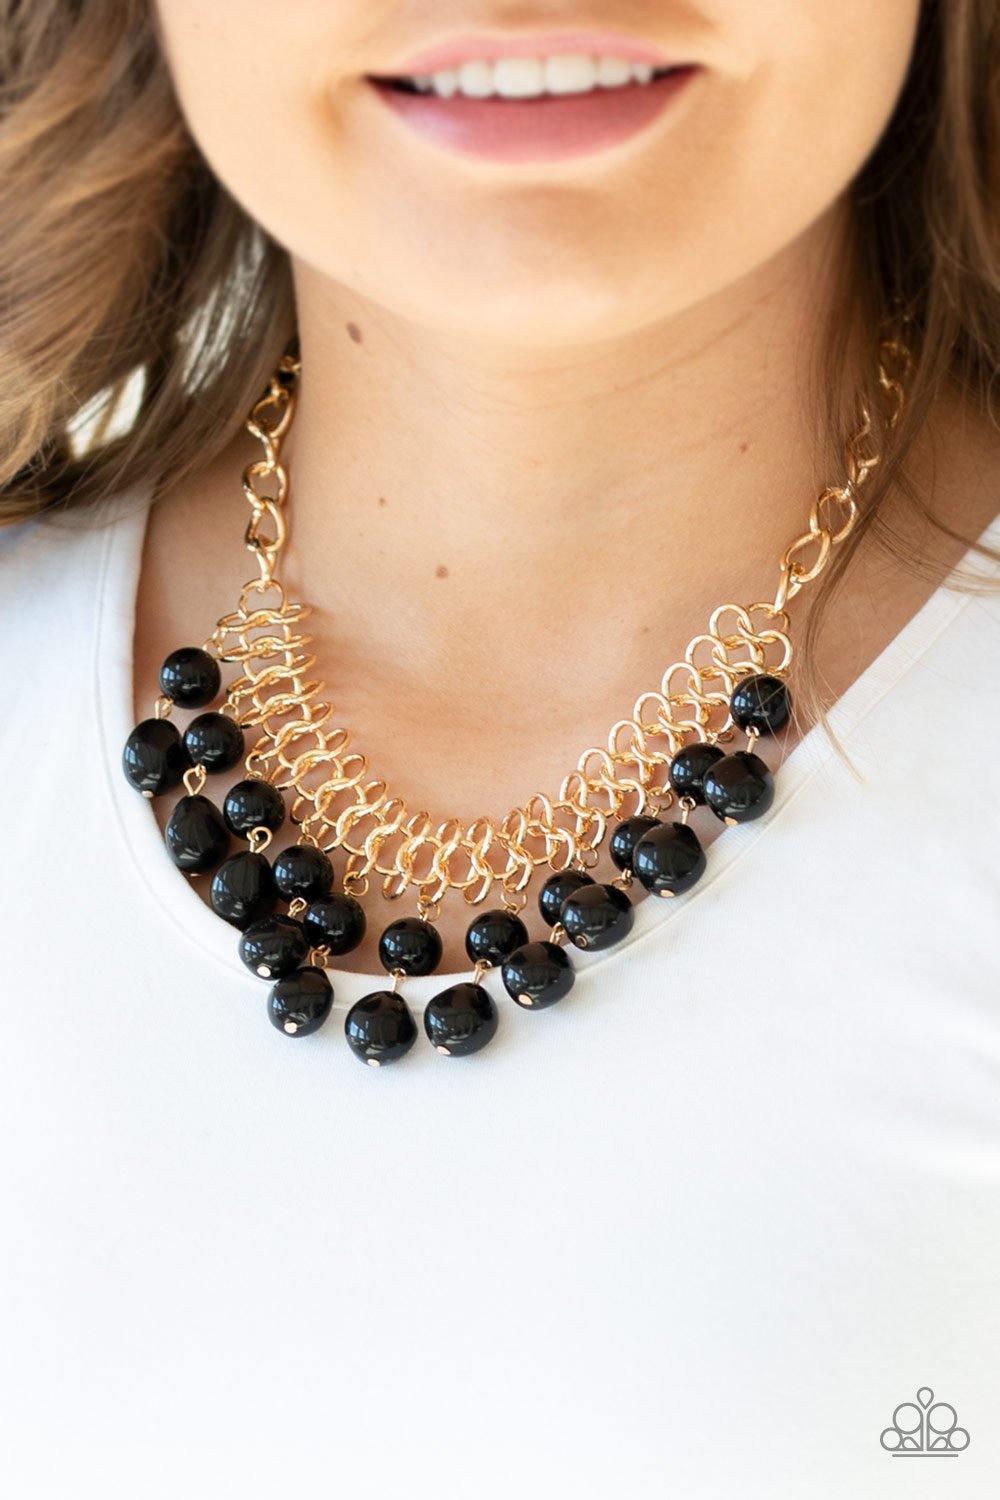 Paparazzi Accessories 5th Avenue Fleek - Black A collection of classic and imperfect black beads dangle from a web of interlocking gold links below the collar, adding a modern twist to the timeless palette. Features an adjustable clasp closure. Sold as on